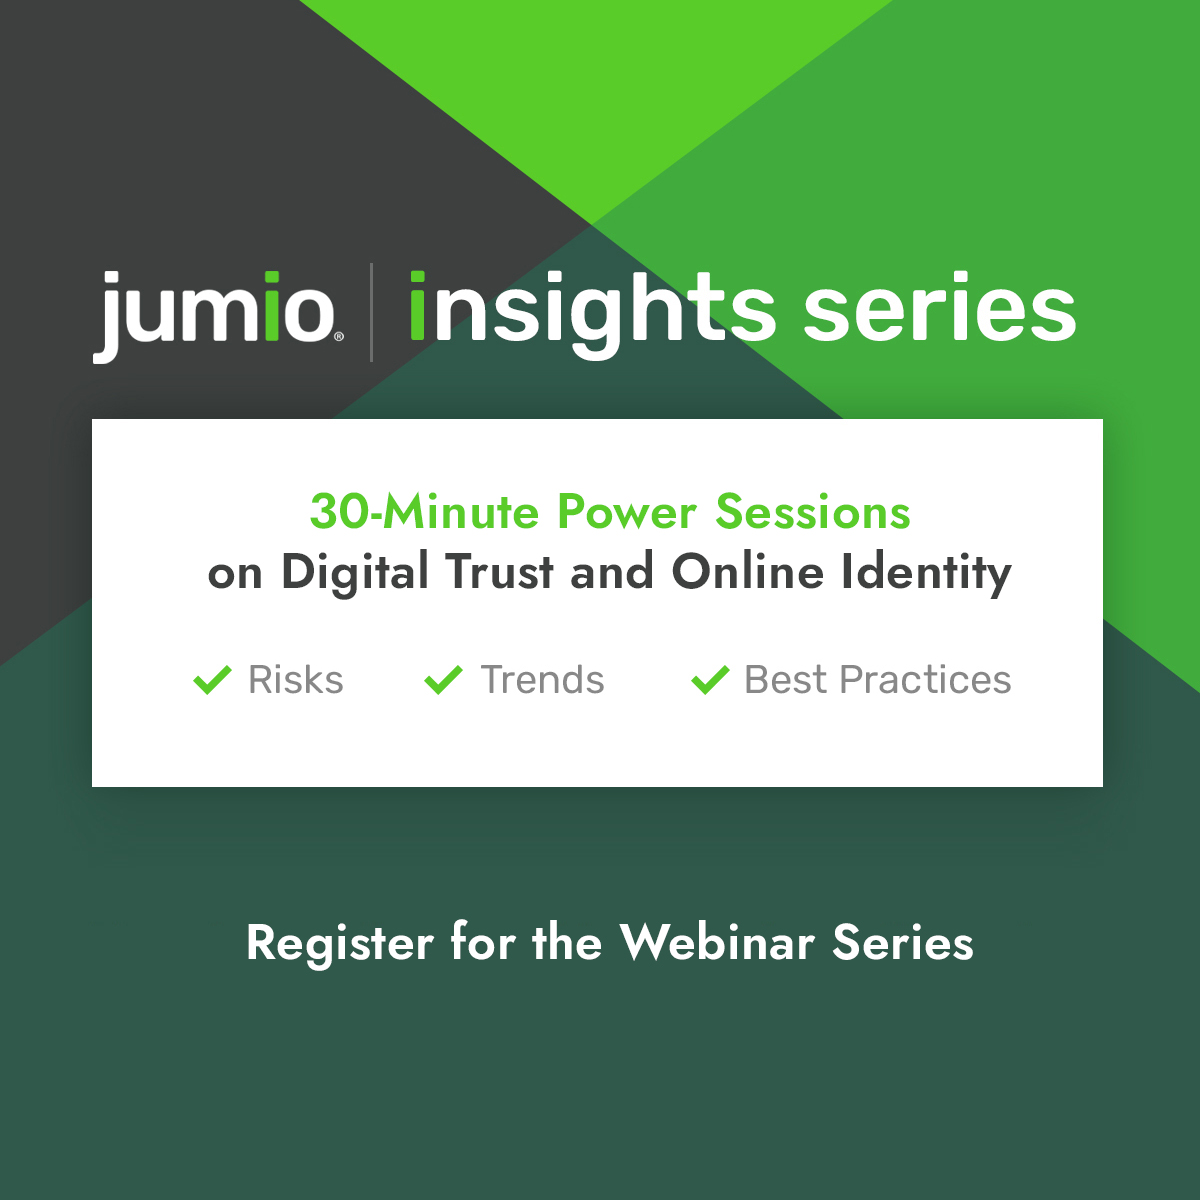 Join us for the Jumio Insights Series! These 30-minute power sessions cover digital trust and online identity risks, trends and best practices. Learn more and register for the series here: series.brighttalk.com/series/6327?ut…